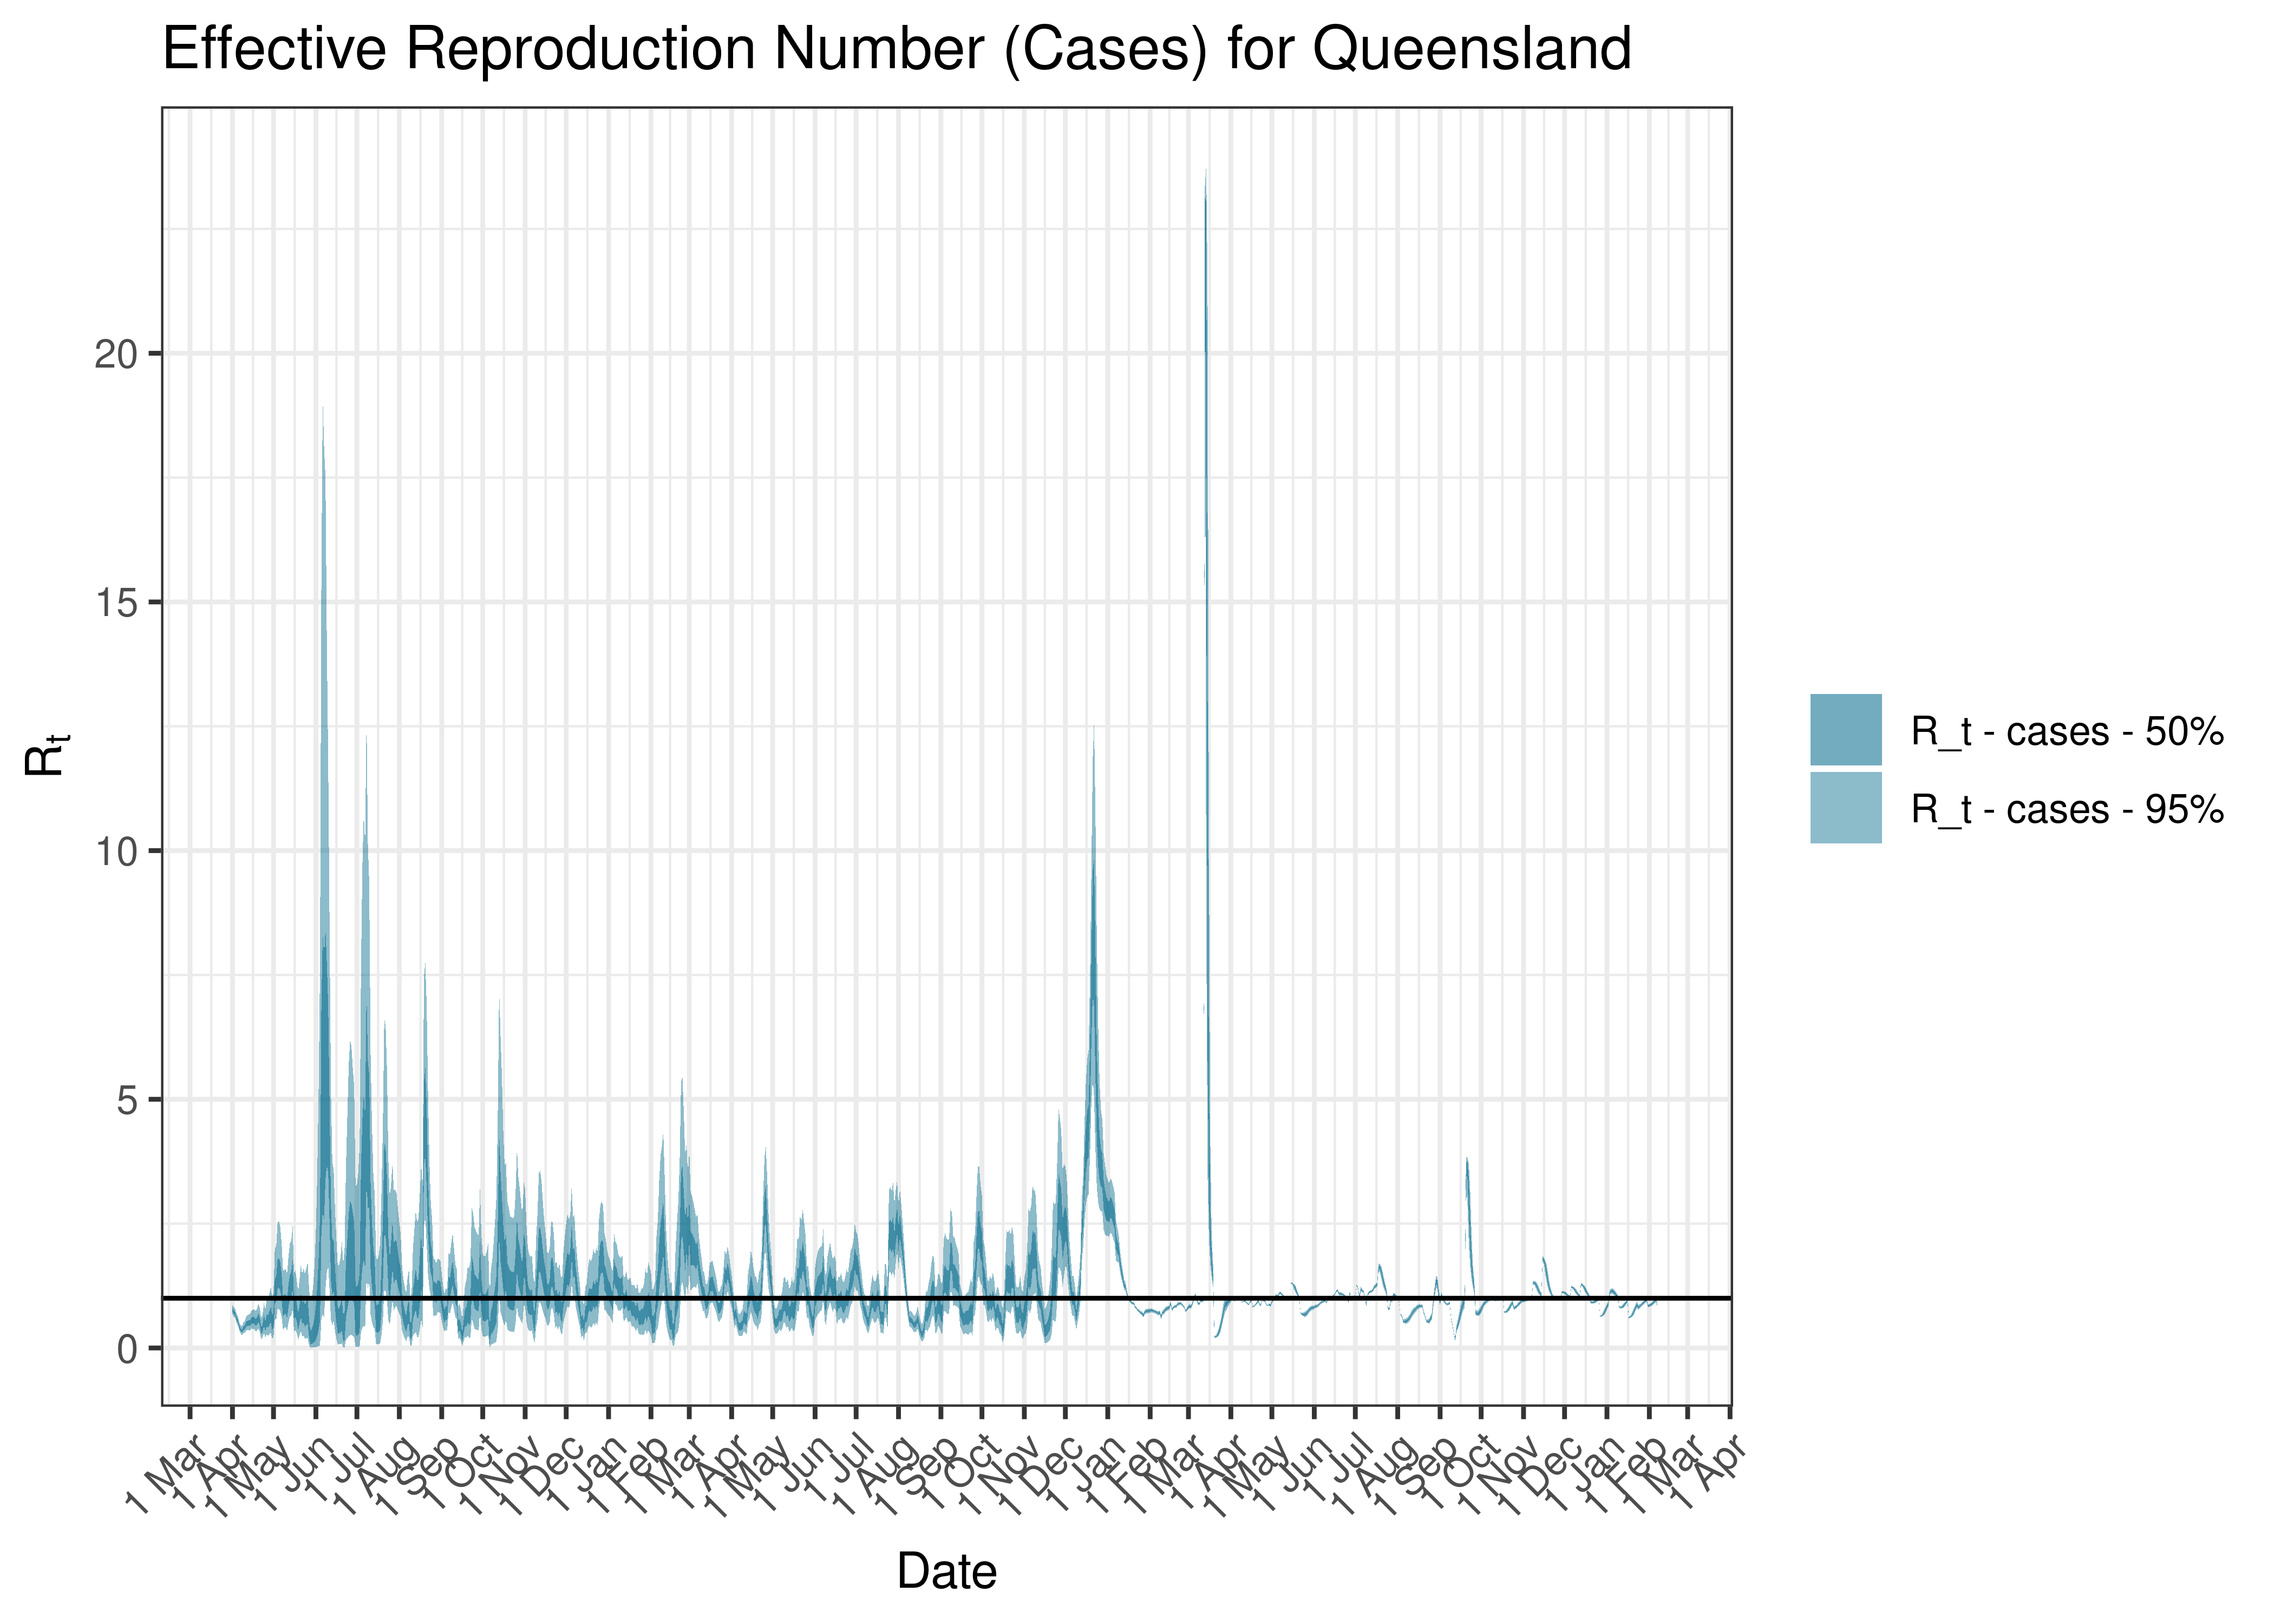 Estimated Effective Reproduction Number Based on Cases for Queensland since 1 April 2020